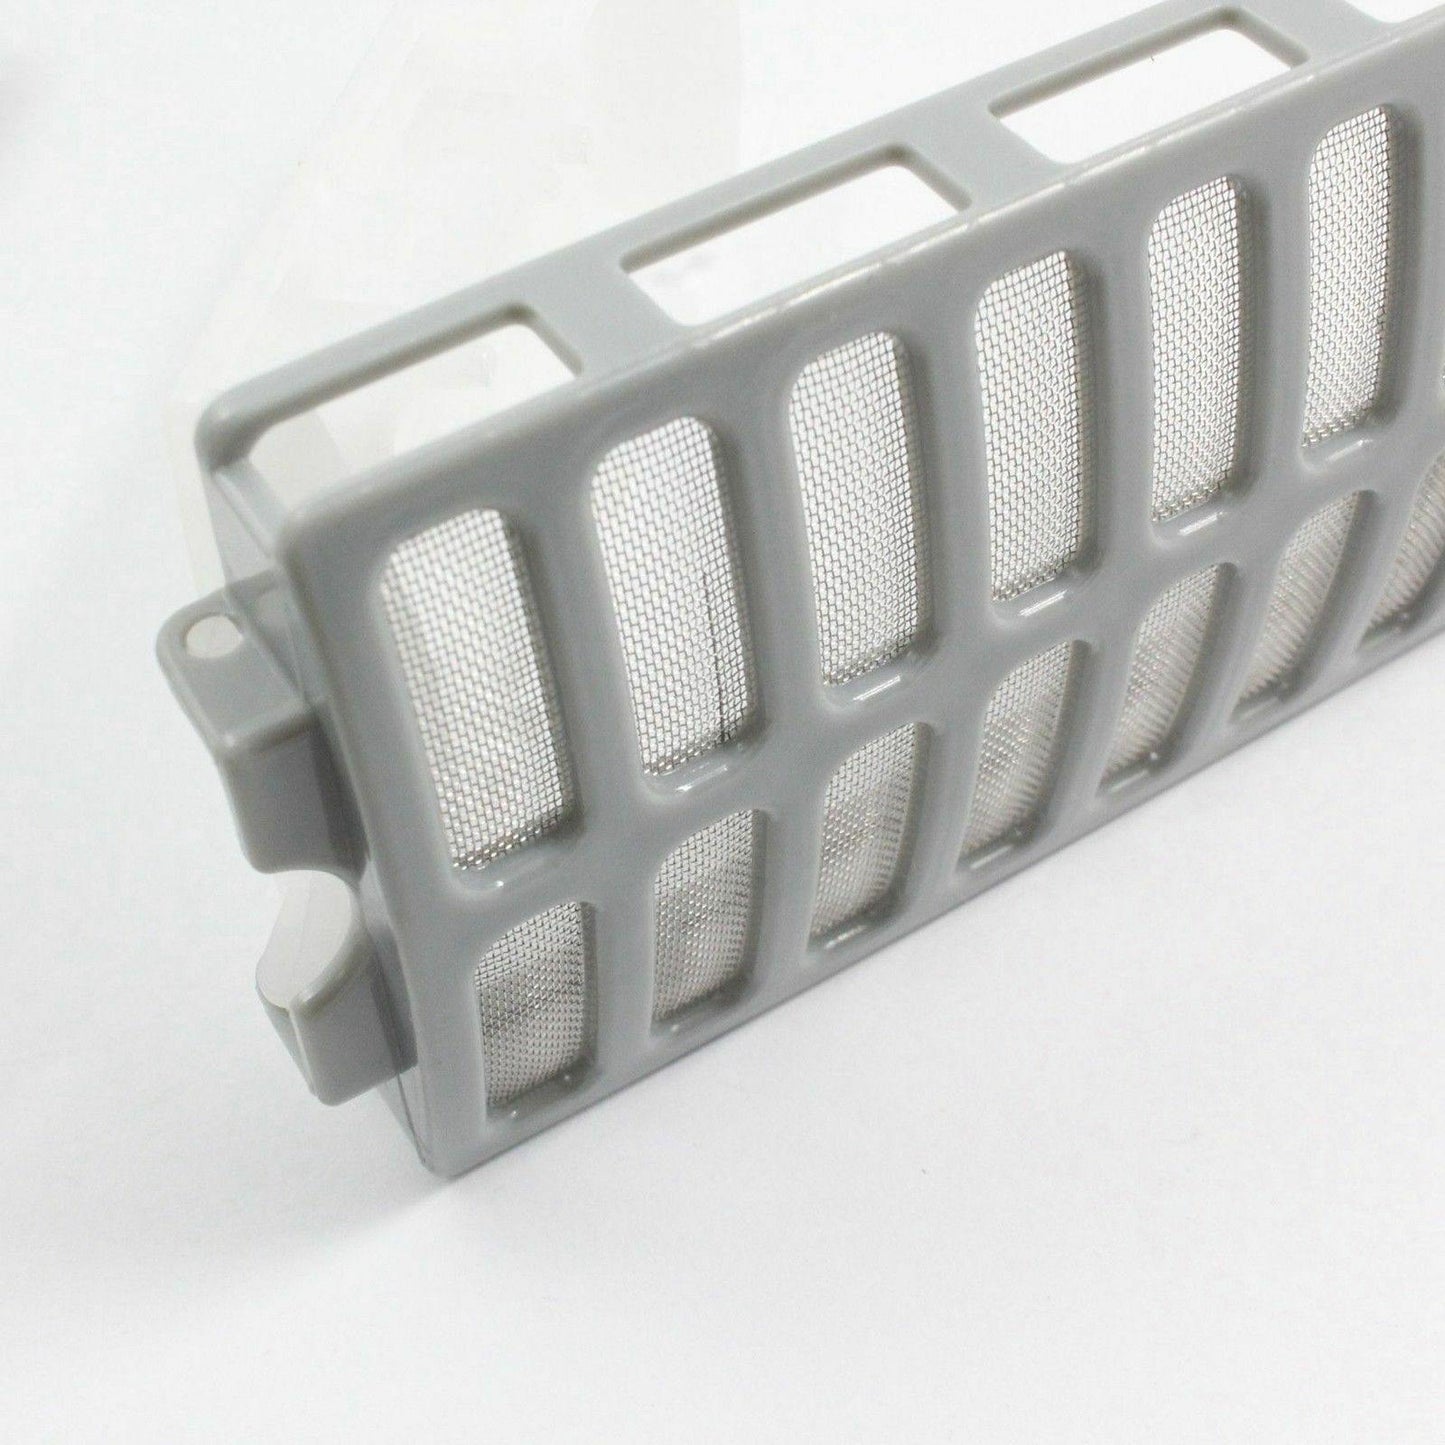 Washing Machine Lint Filter Assembly For LG WT-R107 WT-H800 WT-H8006 WT-H950 Sparesbarn